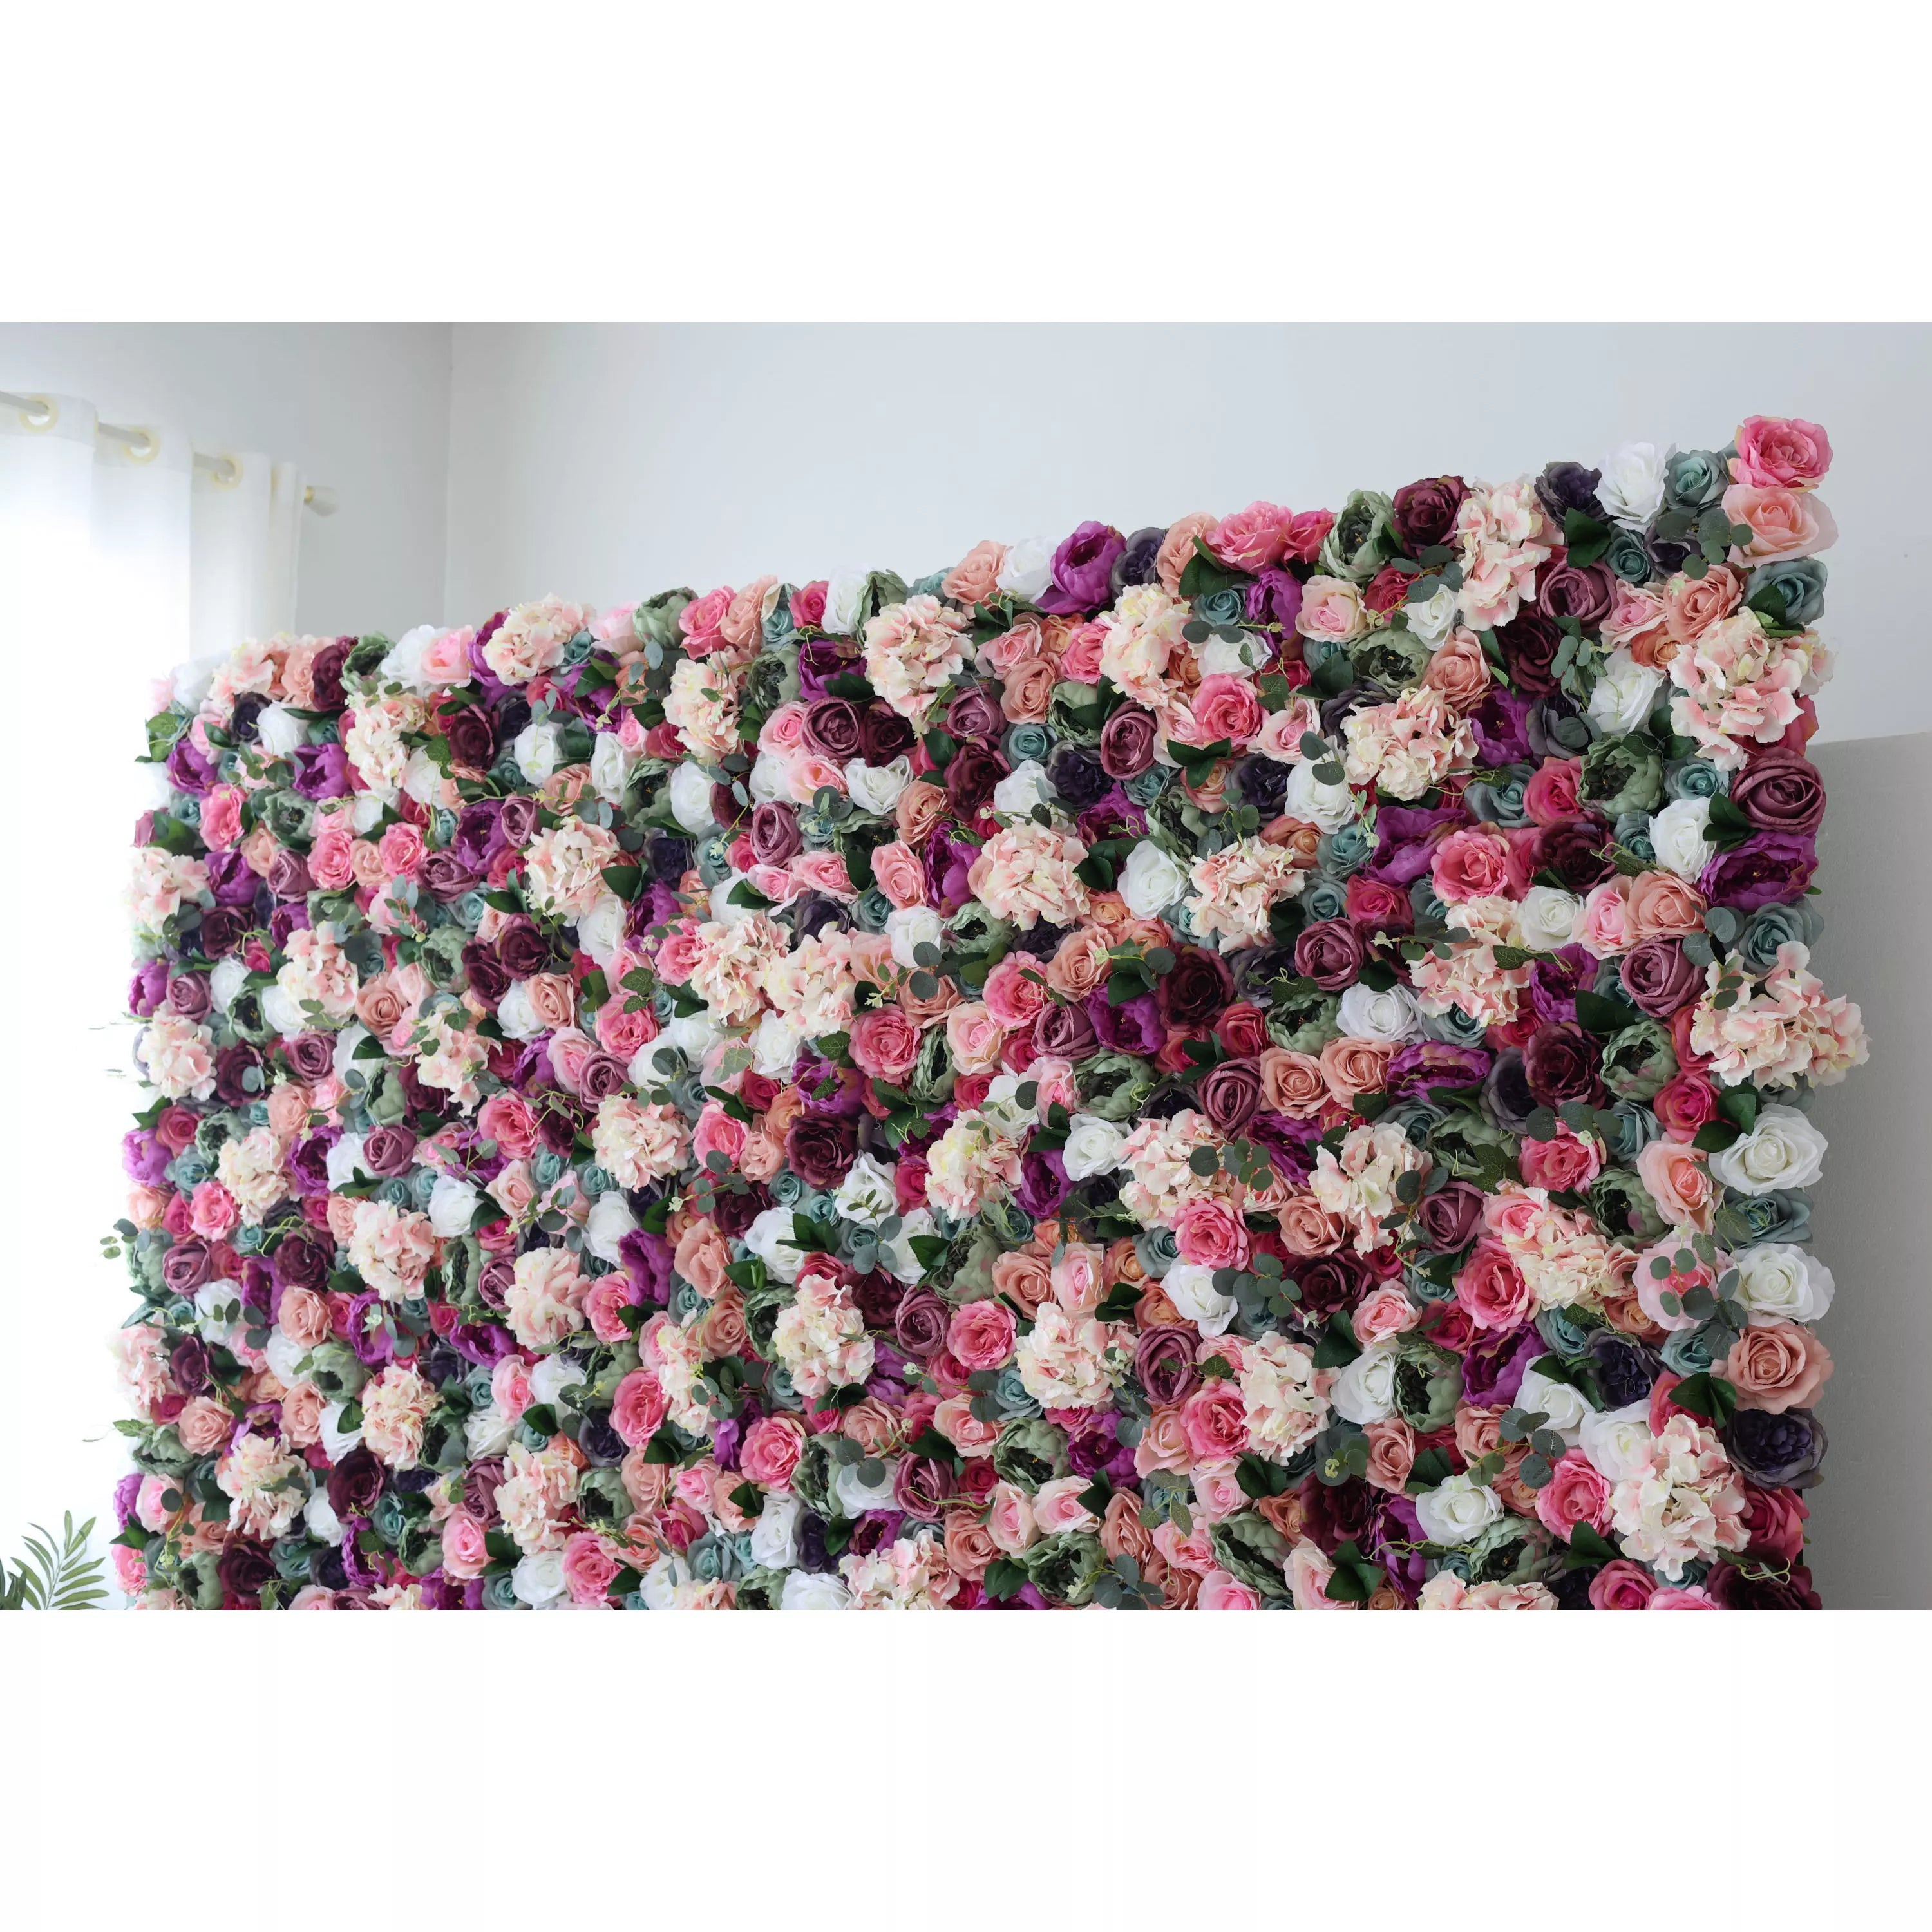 Valar Flowers artificial mixed floral fabric backdrop with eggplant purple and white colors for weddings and events - VF-0800